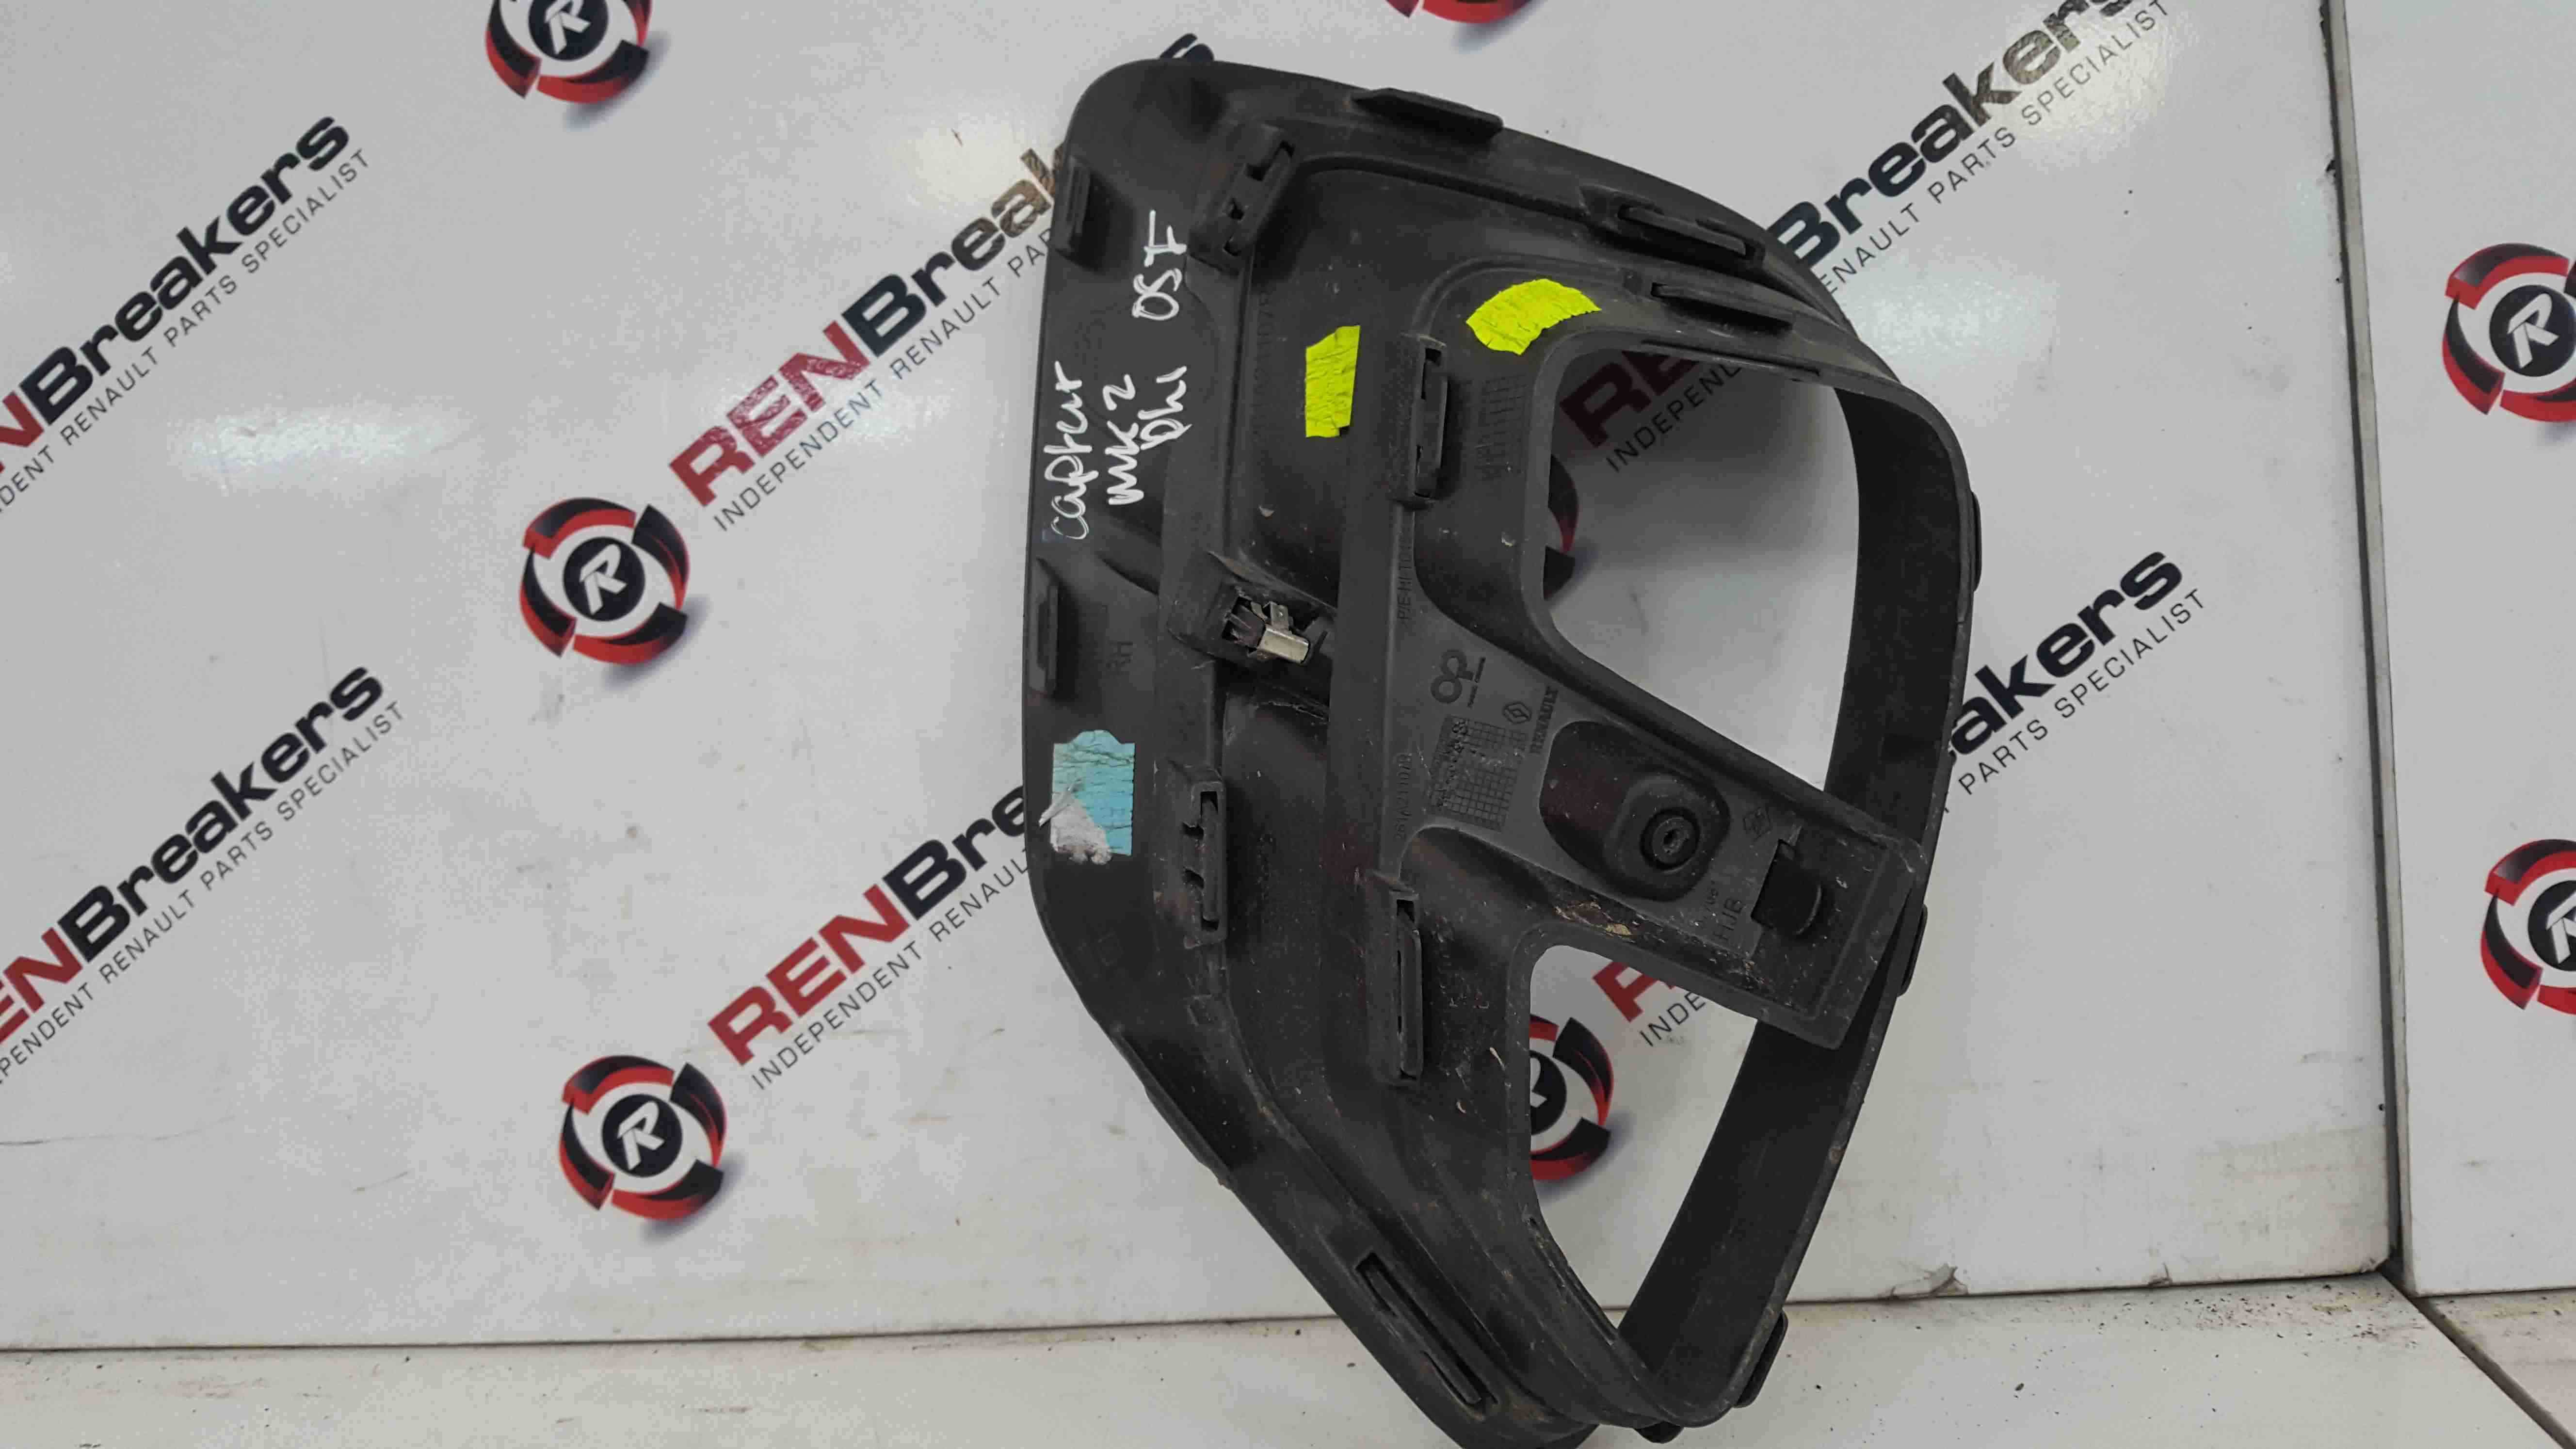 Renault Captur 2019-2021 Drivers OSF Front Bumper Insert Grill Holder  261A21107R - Store - Renault Breakers - Used Renault Car Parts & Spares  Specialist